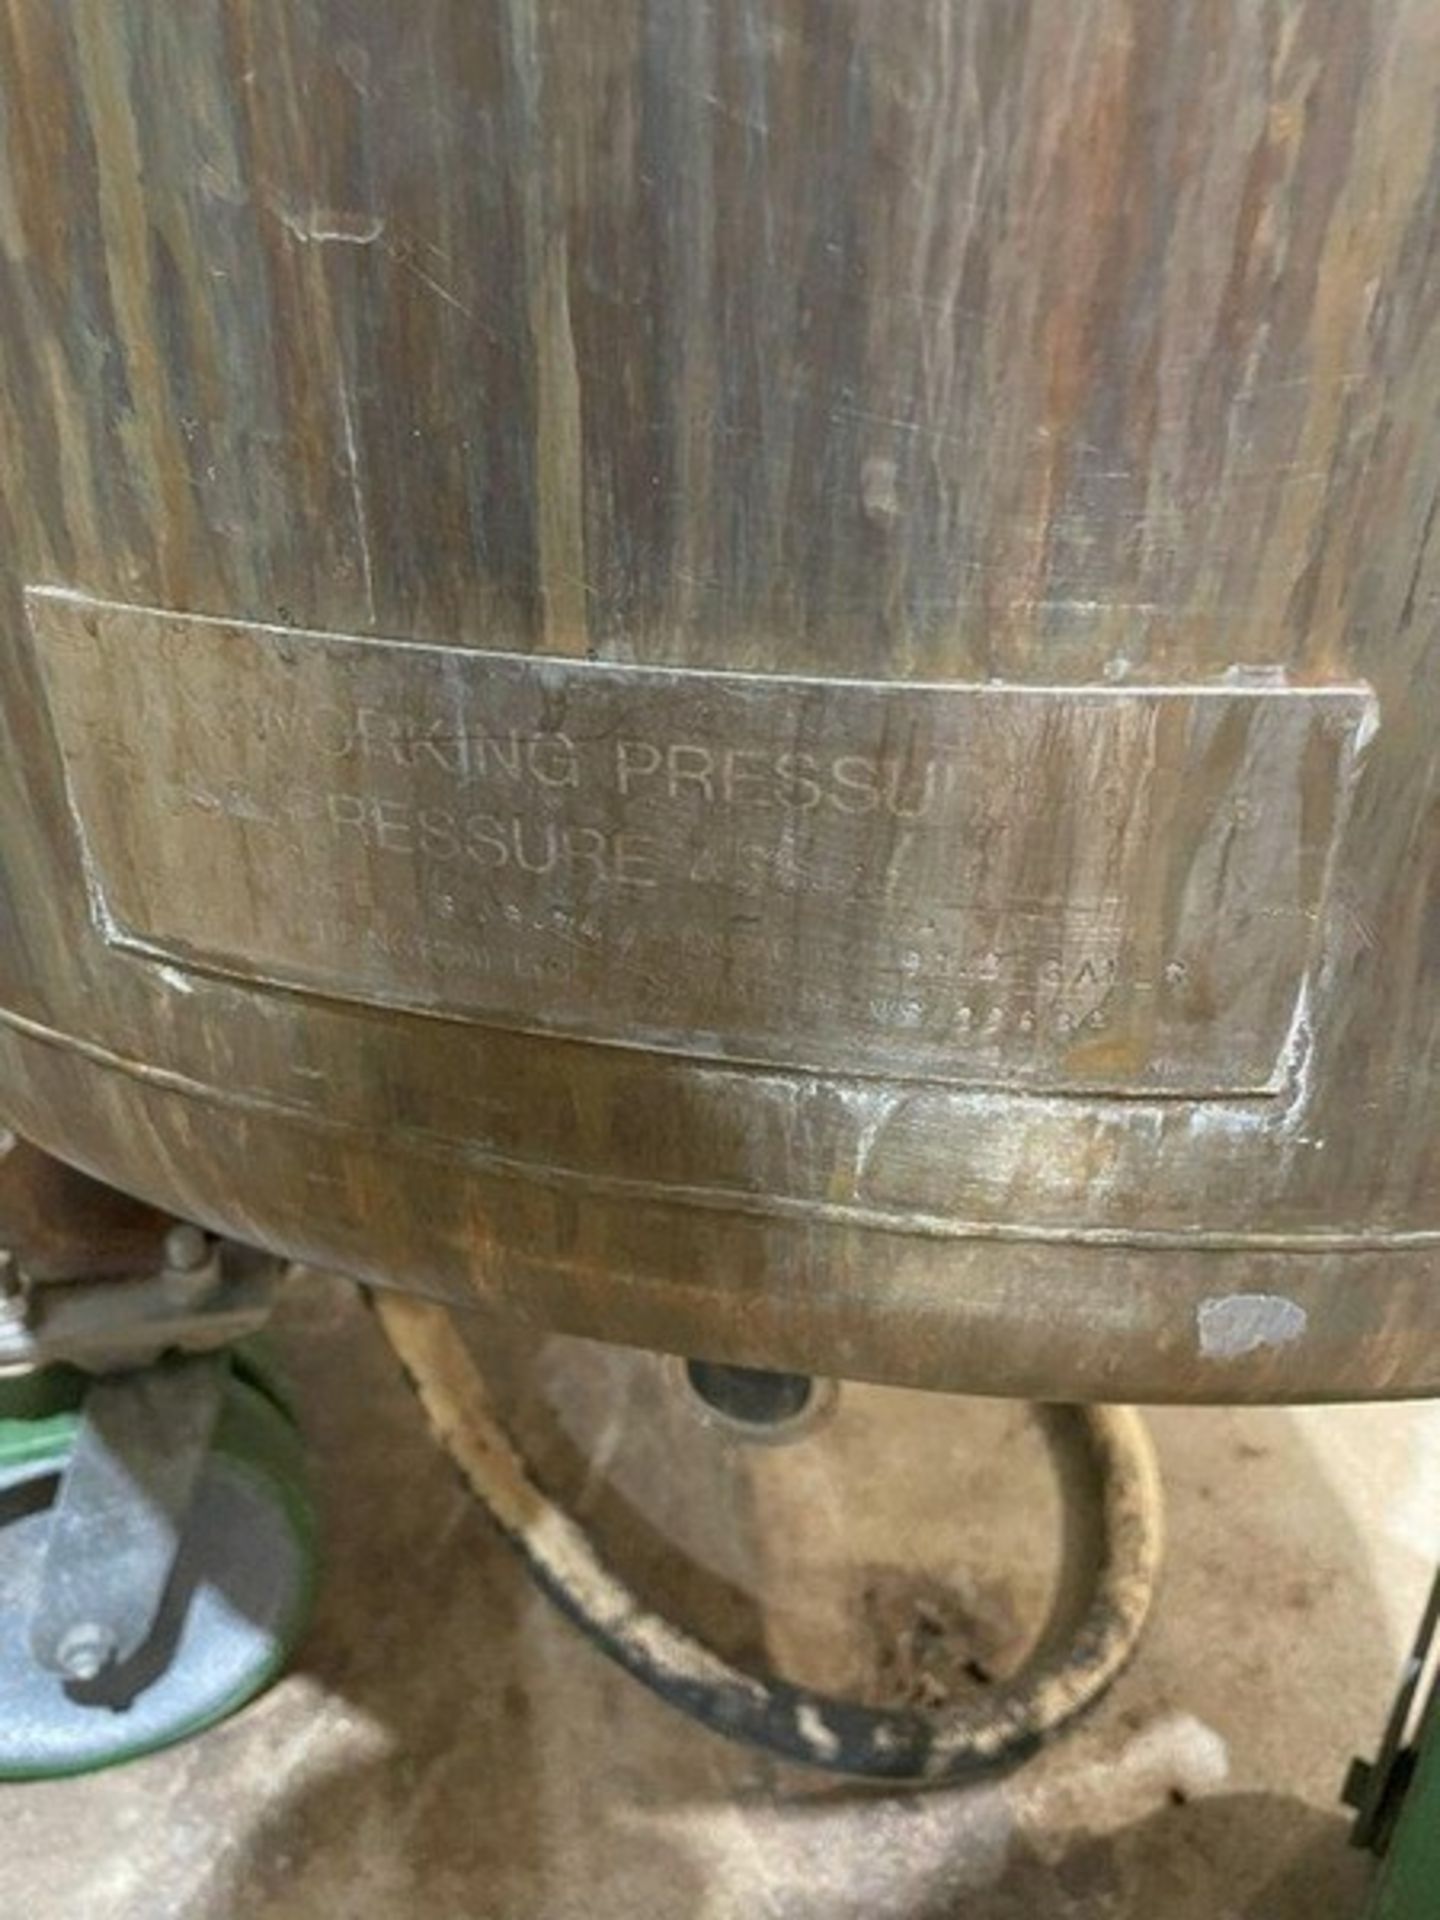 Grundy 5 Gal. S/S Jacketed Vessel, Test Pressure 45 PSI (LOCATED IN FREDERICK, MD) - Bild 3 aus 5